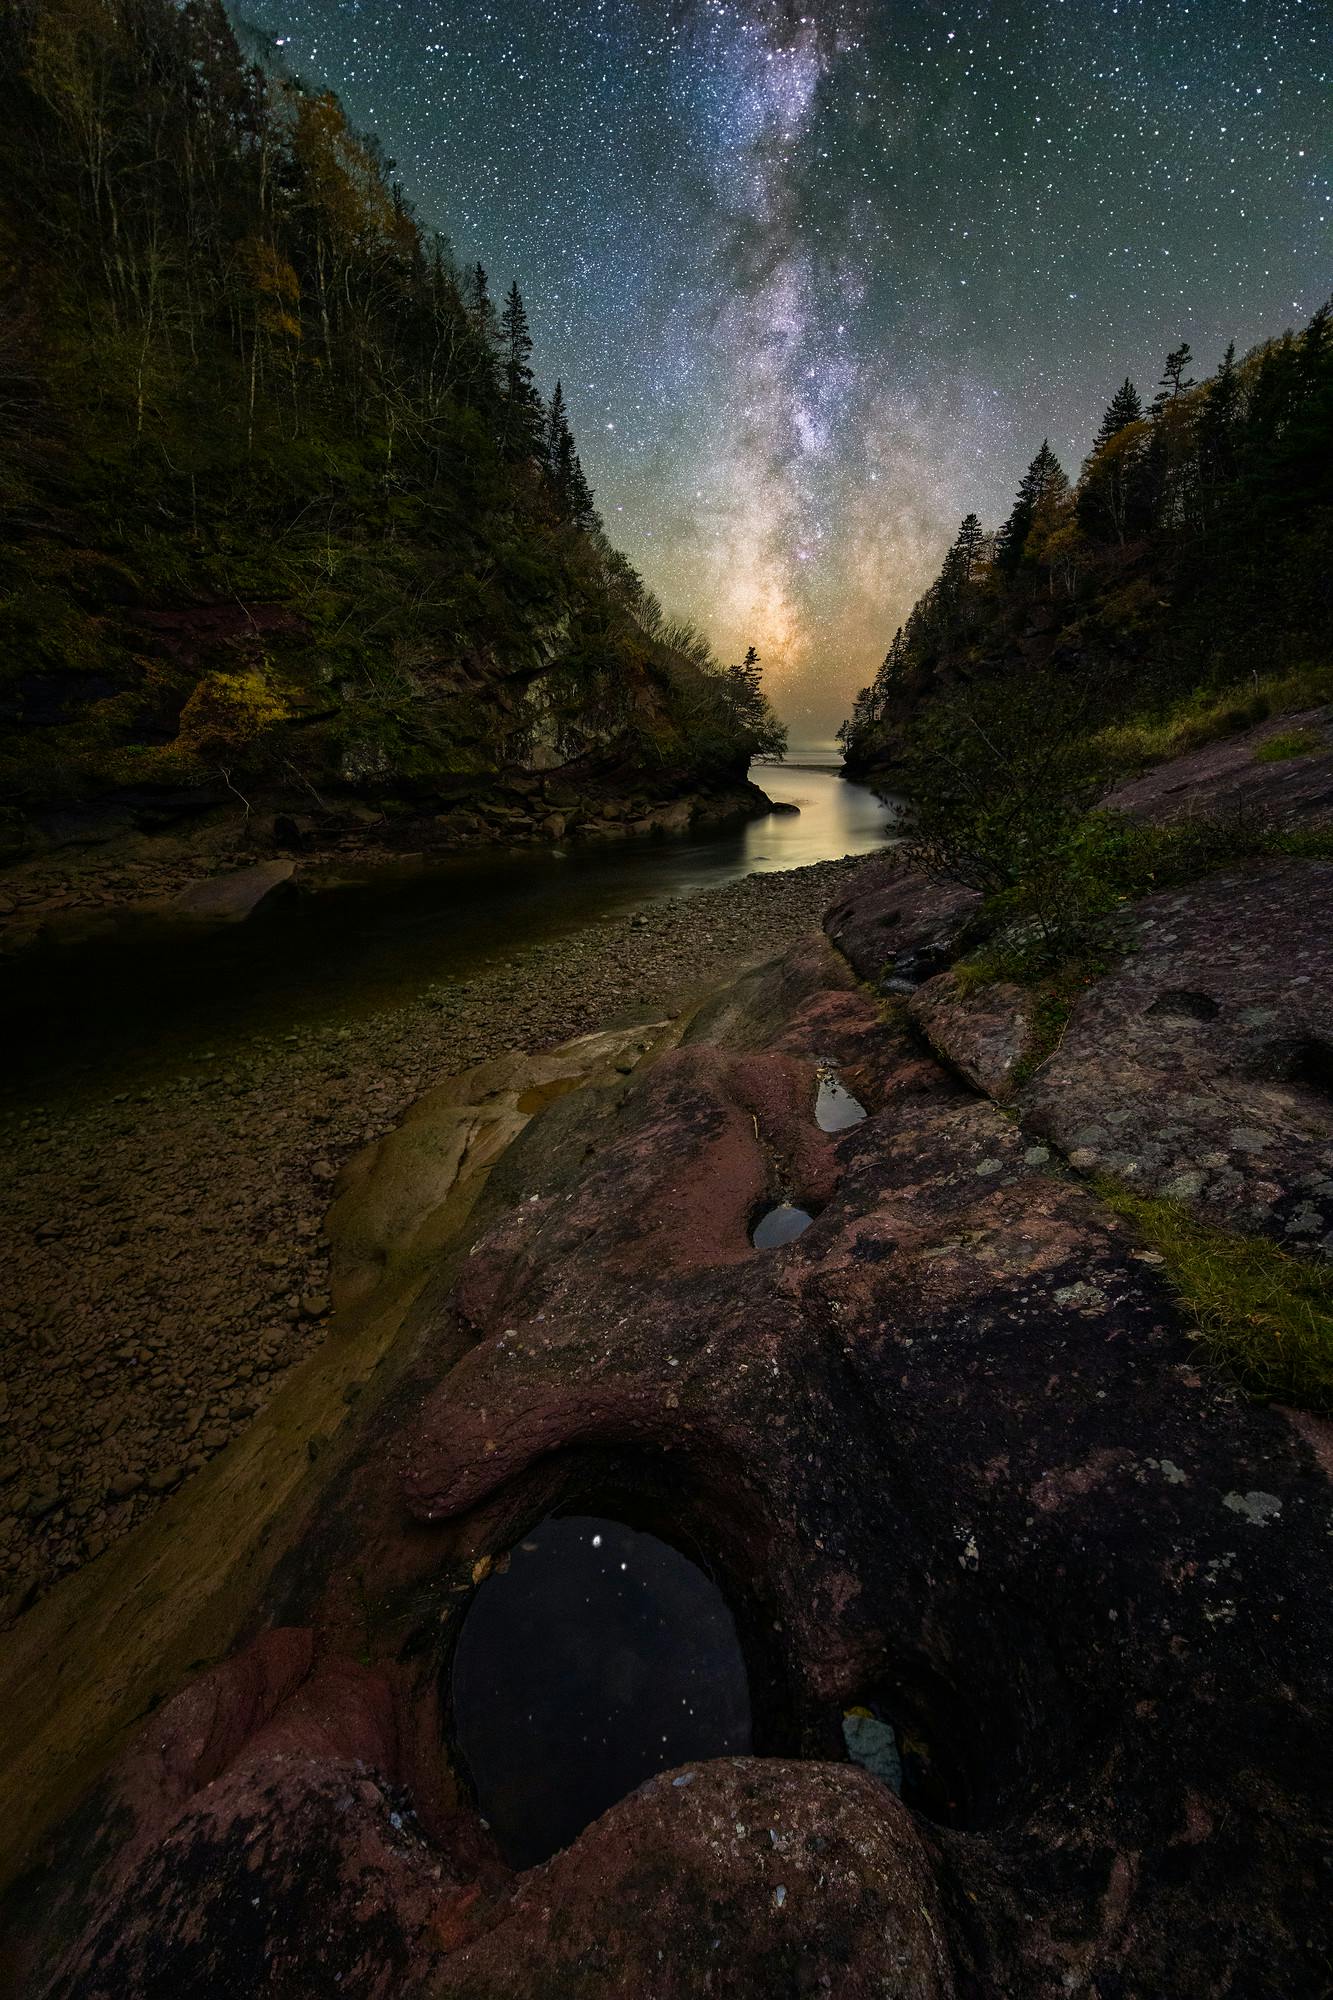 Milky Way Over Point Wolfe River Gorge